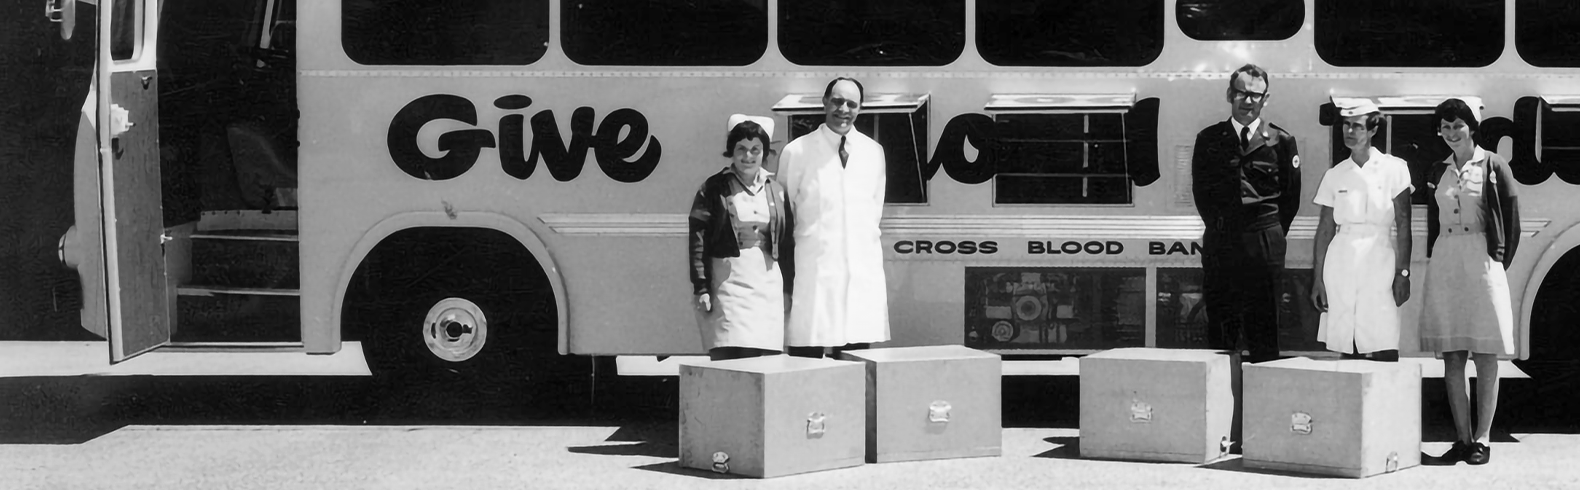 1940s photograph, black and white. 3 female nurses and 3 men standing in front of 'Donormobile' bus.